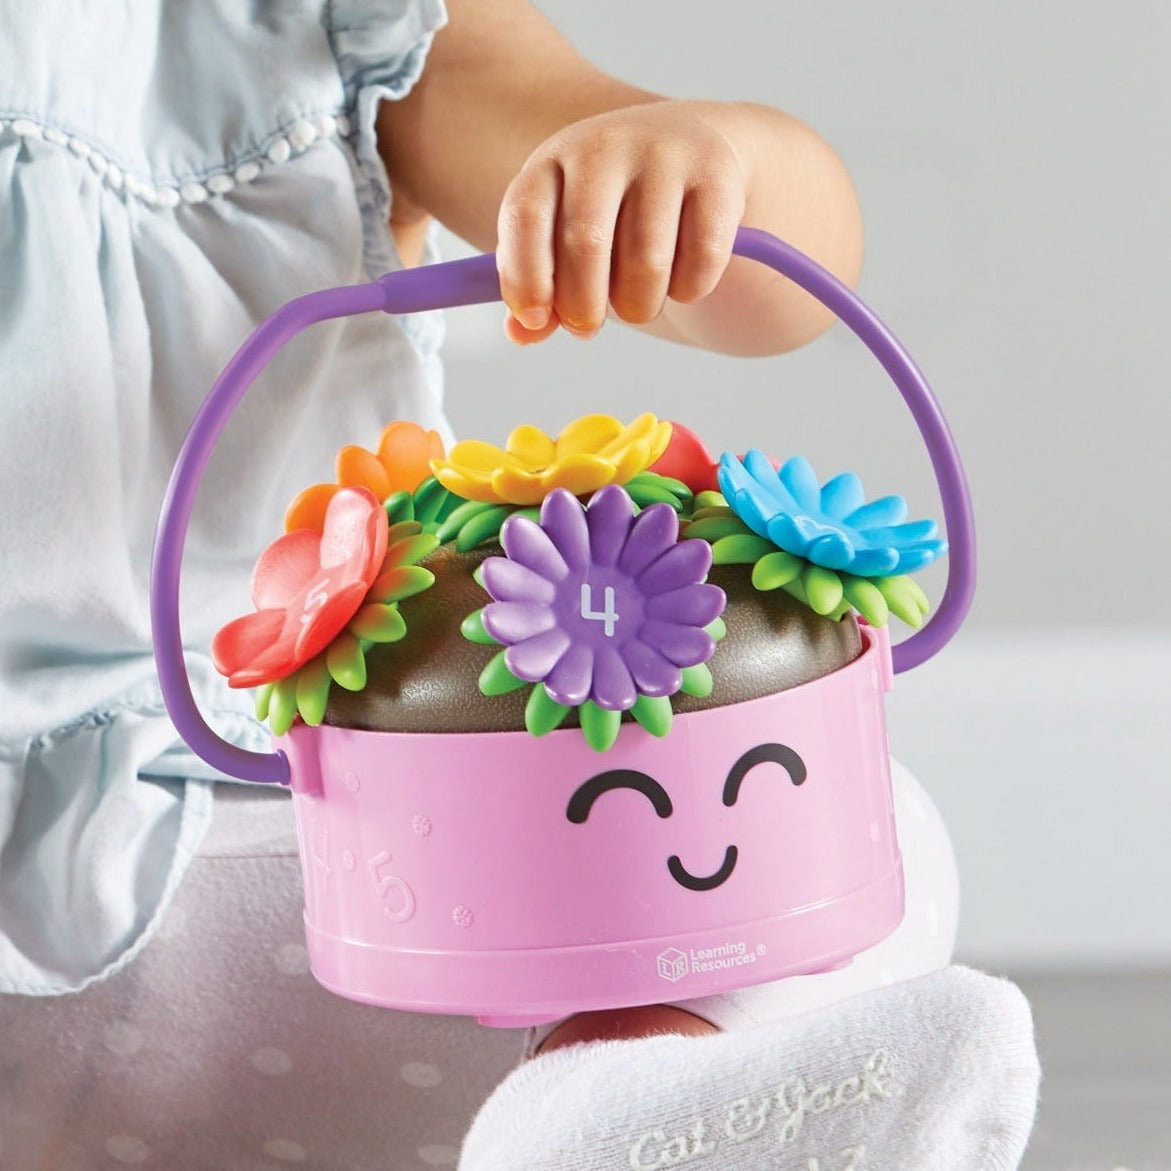 Poppy The Count & Stack Flower Pot, Meet Poppy and her 6 colourful count-and-stack-flowers! They're ready for preschool fine motor fun. Stack Poppy’s 2-piece flowers, then count them up with this flower pot toy. As they pick Poppy’s flowers or carry her around with her child-sized handle, toddlers and preschoolers build new skills during imaginative play adventures. Learning fun is always in bloom with Poppy and her colourful flowers. Poppy The Count & Stack Flower Pot Whether they're learning in preschool 